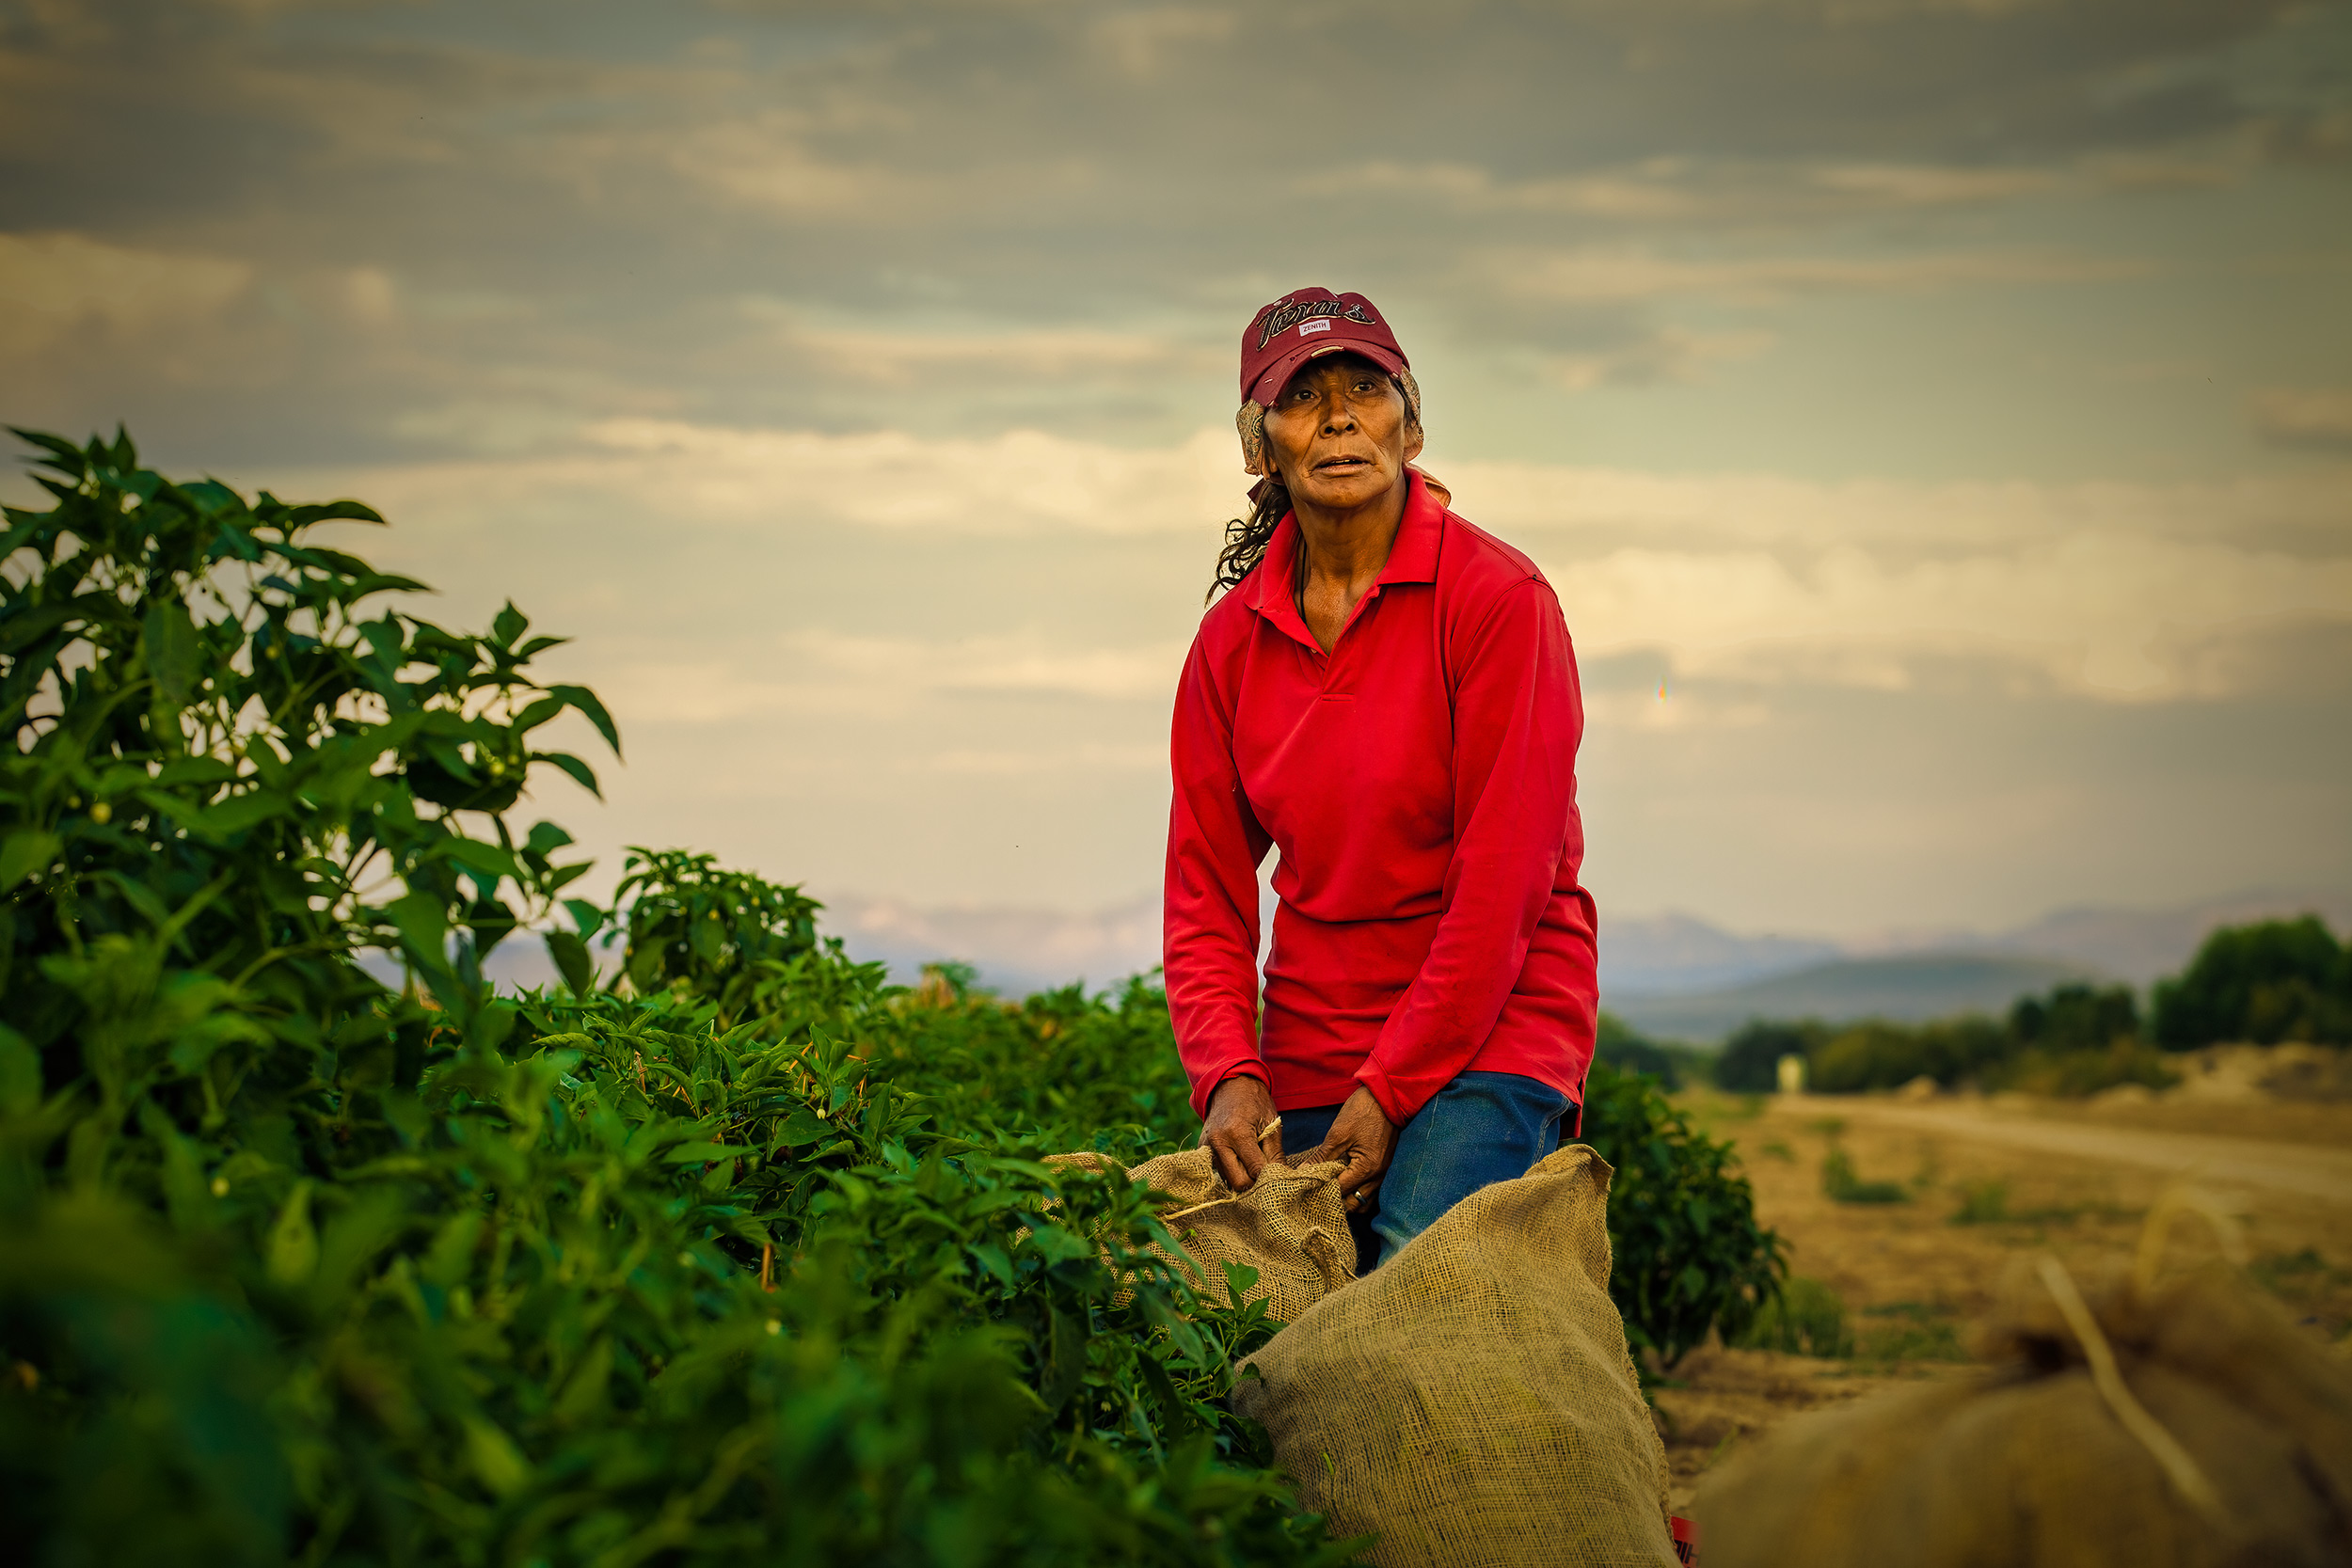 agriculture photography woman with chili pepper sacks in field